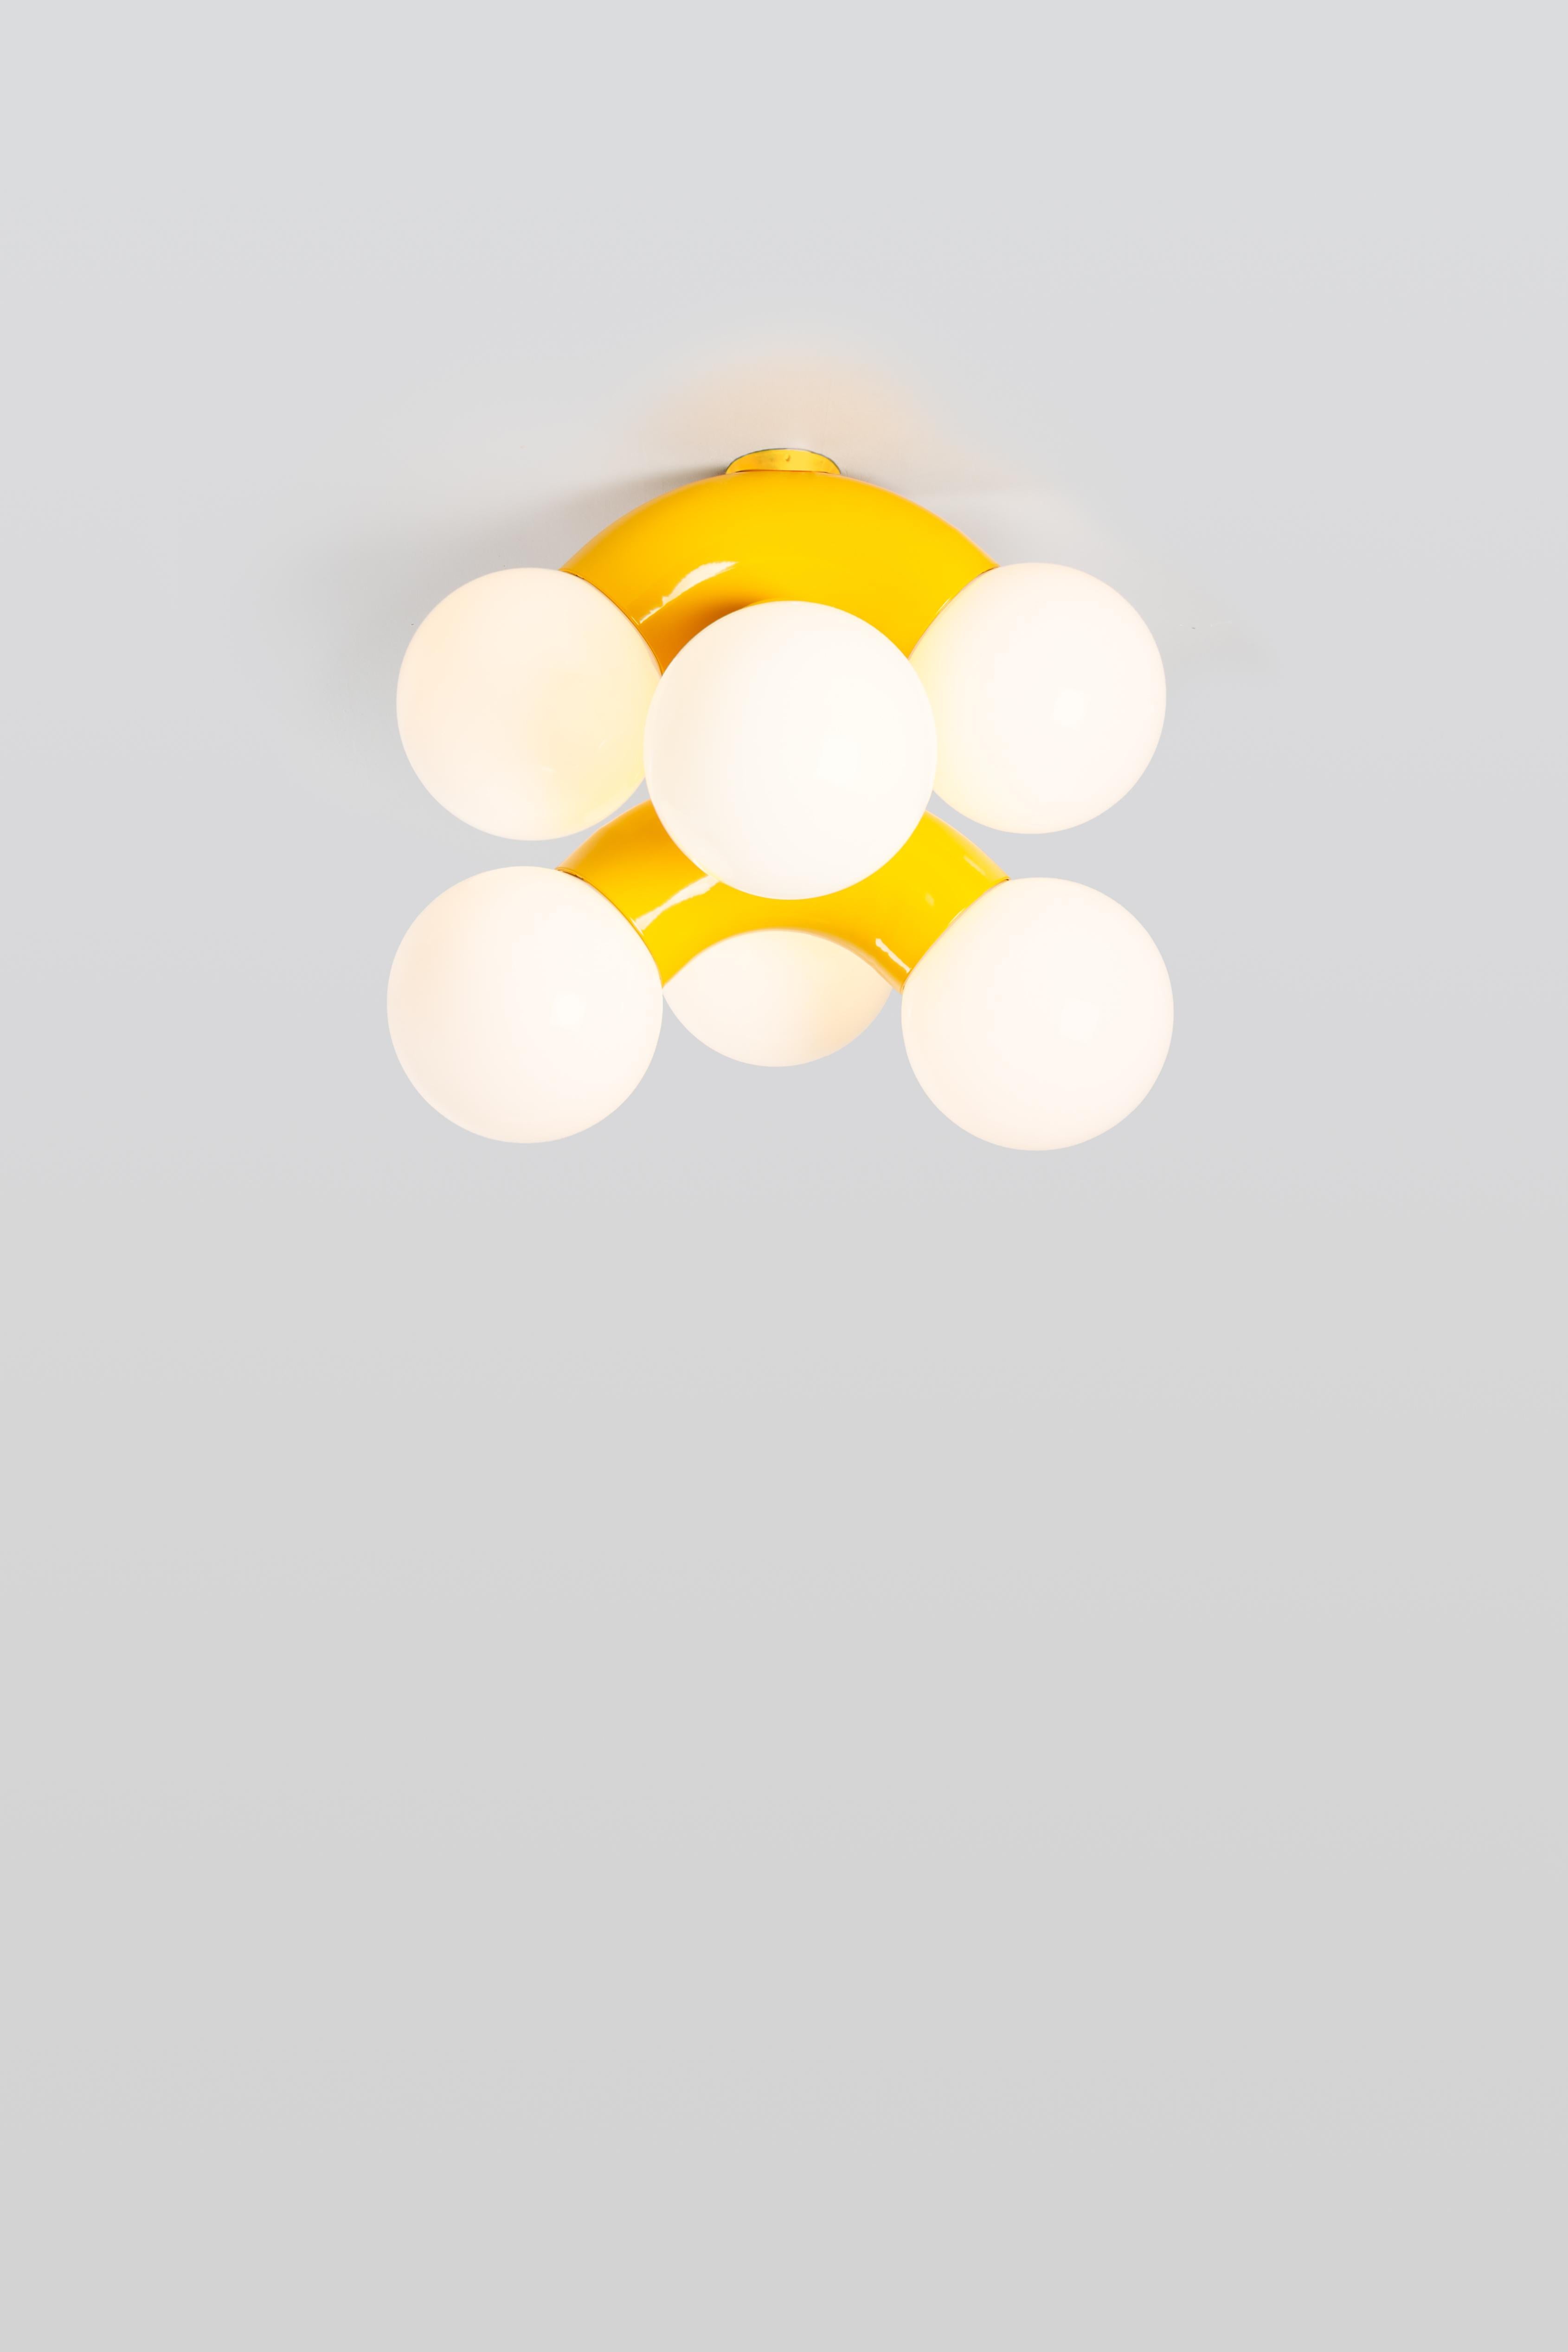 VINE 3-C, ceiling lamp
Design: Caine Heintzman, Editor: ANDLight

The vine ceiling lamp combines exaggerated form with the propensity for repetition resulting in an ambitious vertically scaling fixture.

Materials
– Chromed steel
– Opal glass